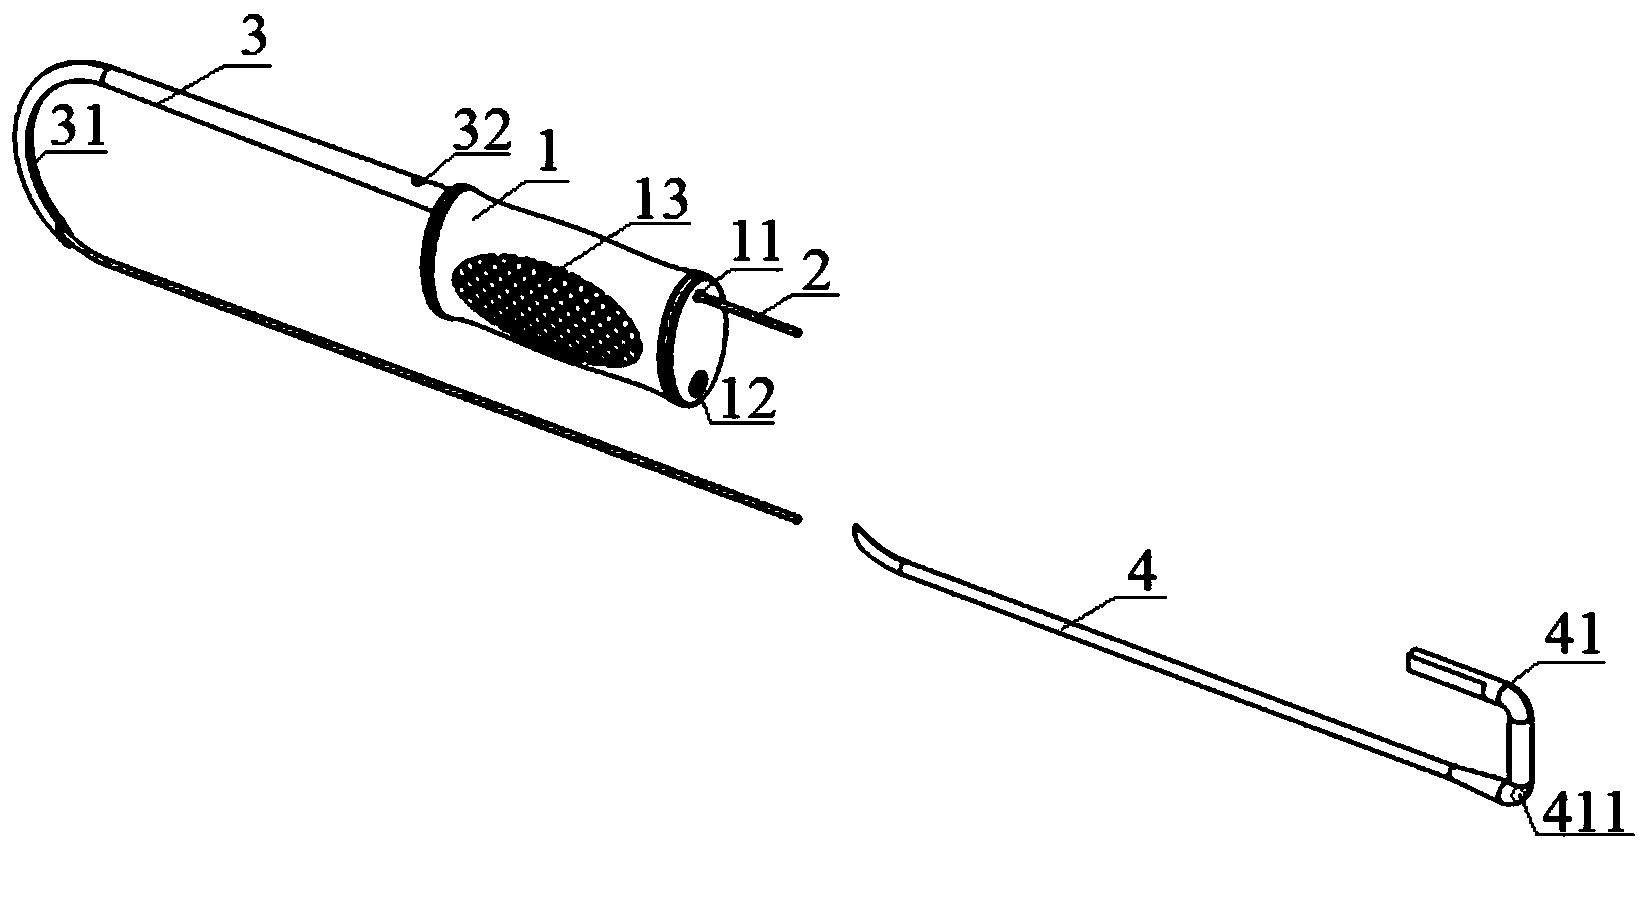 Steel wire guiding device for intertrochanteric fracture